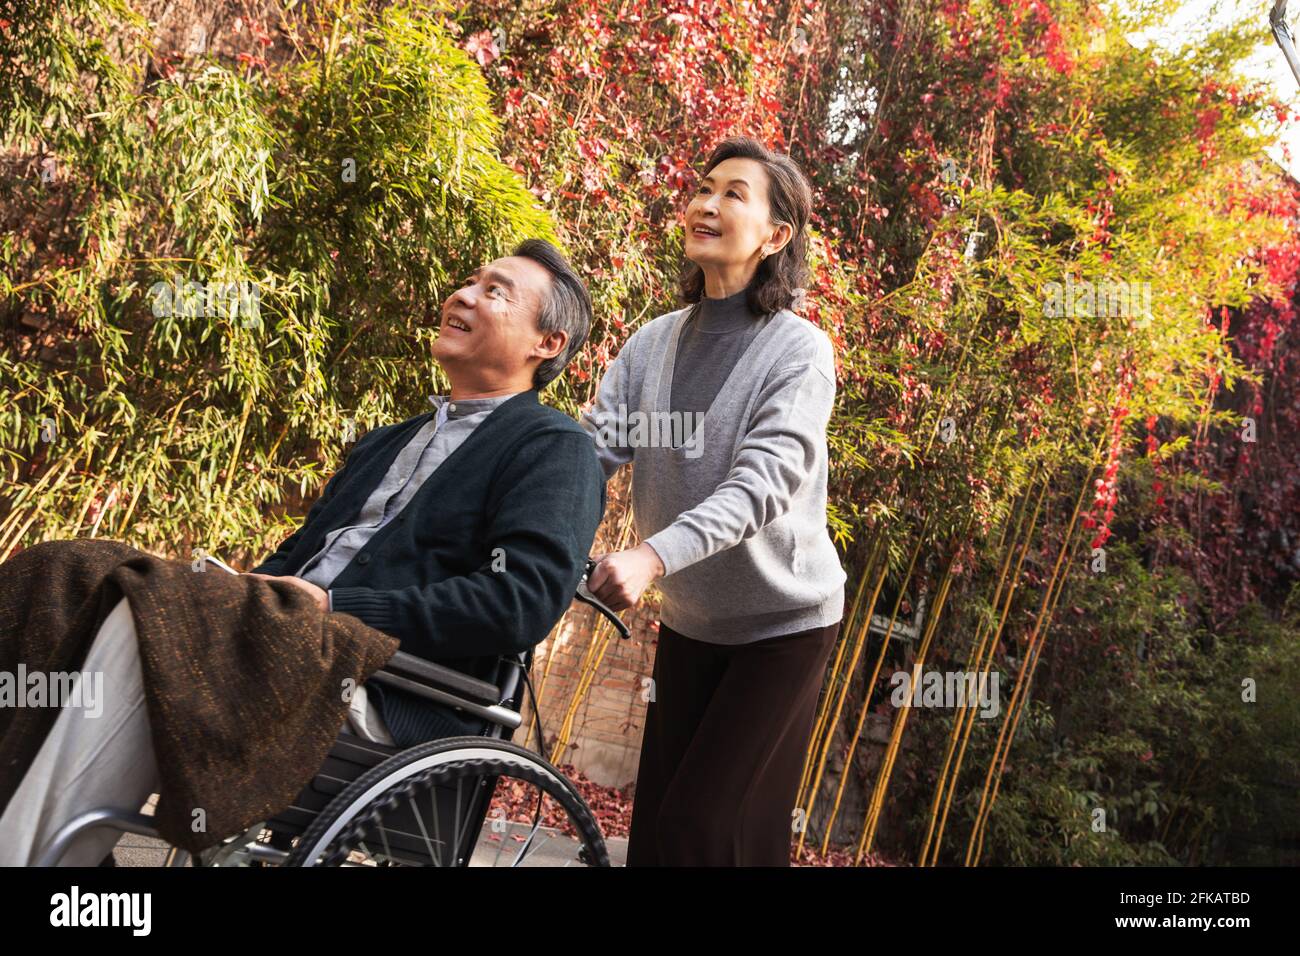 His wife of older women pushing a wheelchair Stock Photo